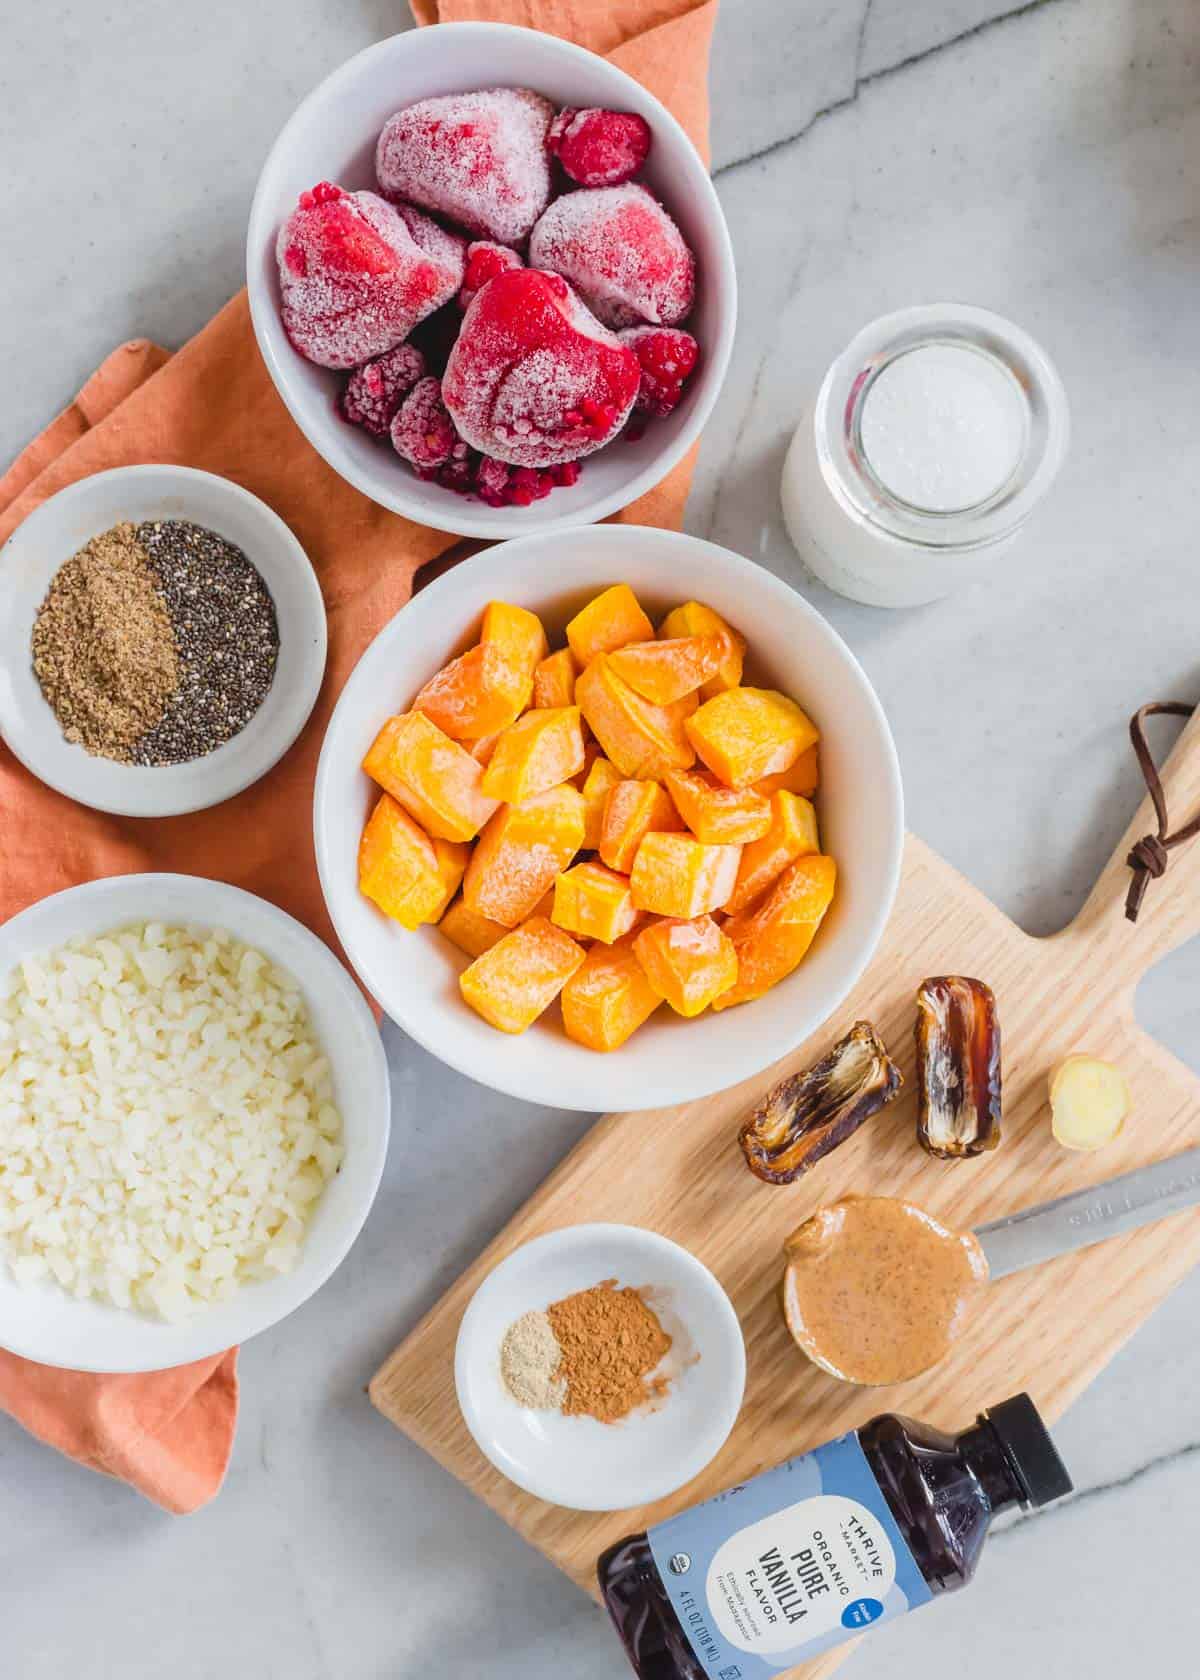 Ingredients to make a butternut squash smoothie including frozen butternut squash, frozen strawberries, frozen riced cauliflower, chia seeds, flax, almond butter, spices and vanilla.